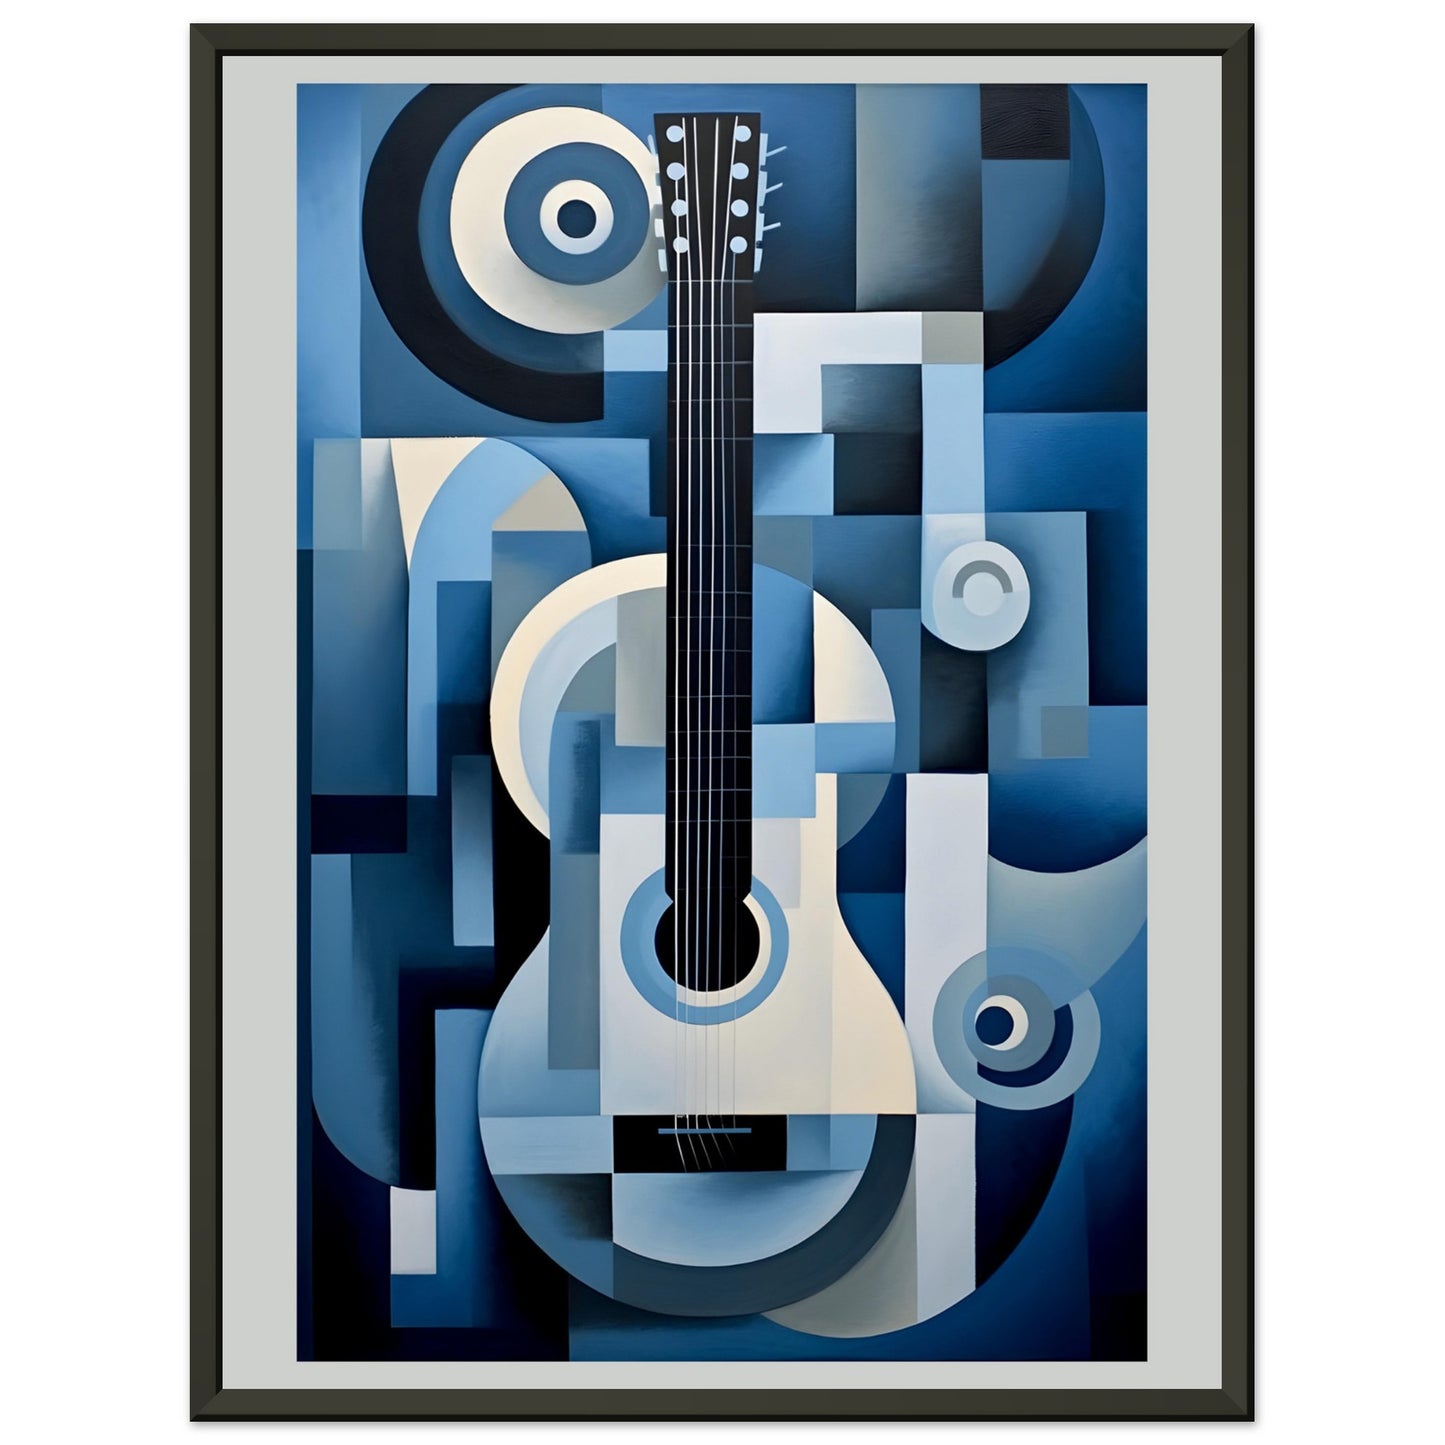 BLUE AND WHITE ABSTRACT 8-STRING GUITAR - Premium Matte Paper Metal Framed Poster